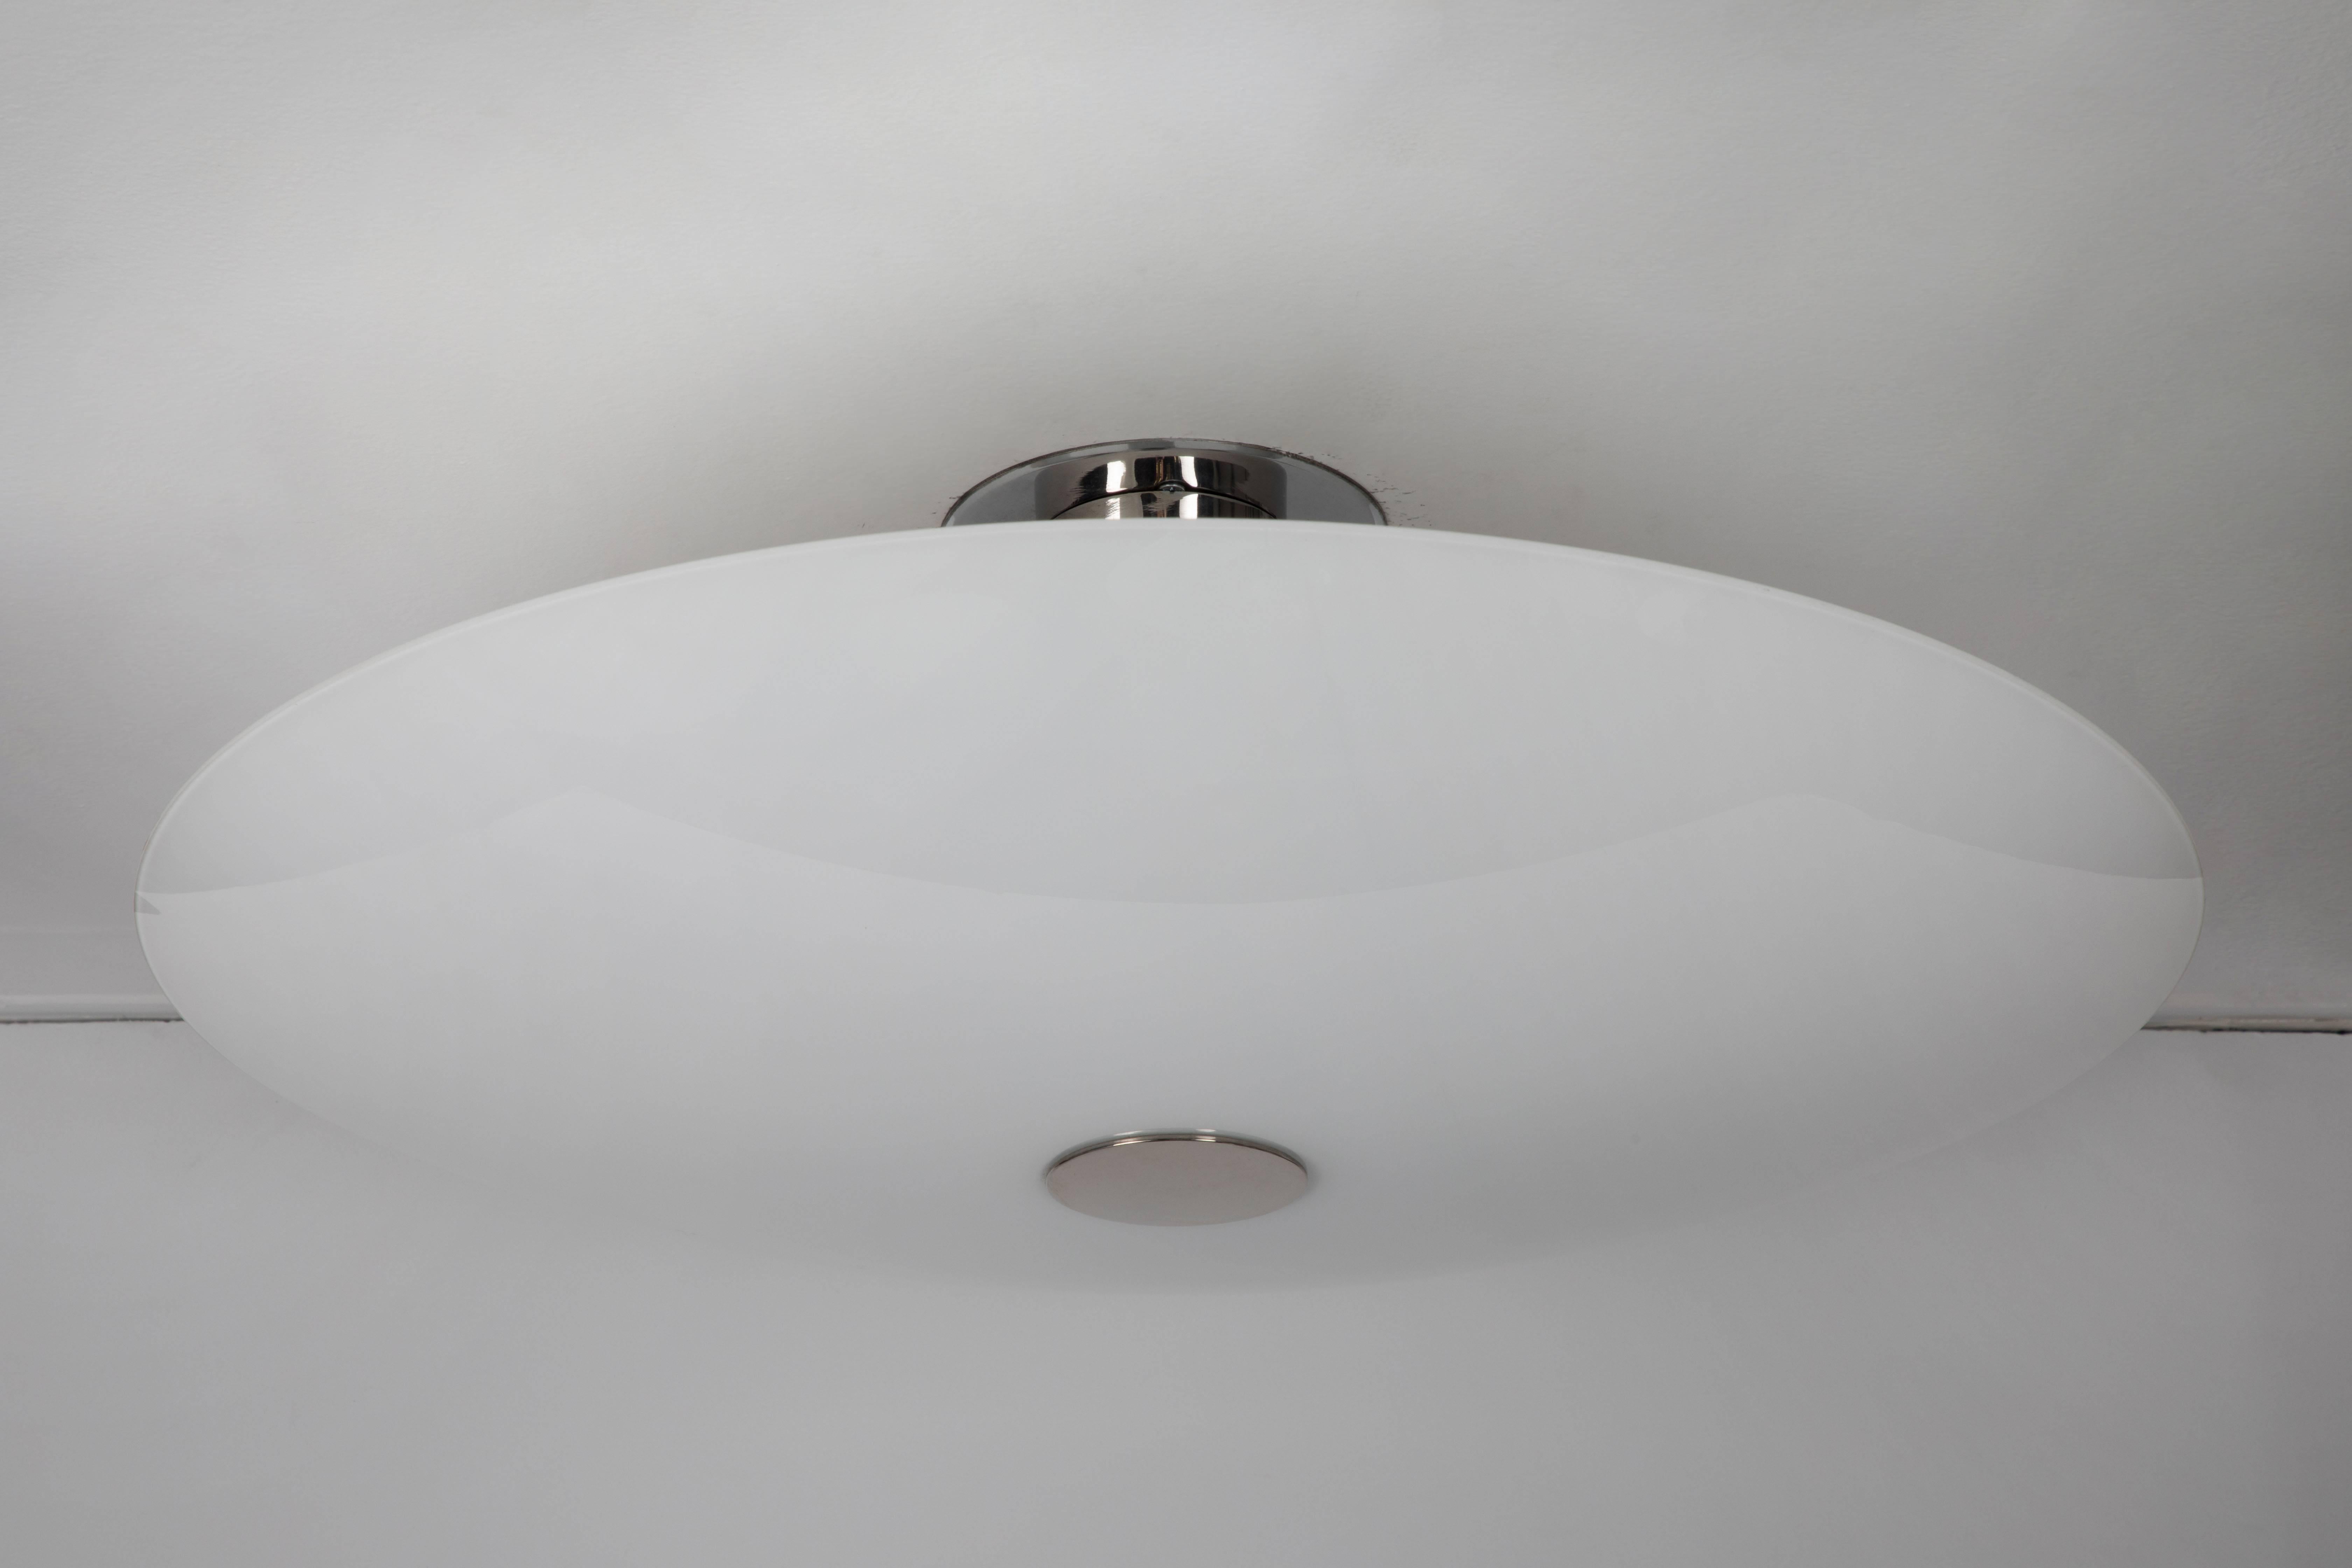 Large, 1960s Florian Schulz 'Gela 55' glass ceiling or wall lamp. Comprised of a single large shield-like dome of opaline glossy glass mounted over a polished steel column that accommodates five medium base standard sockets for ample lighting. A